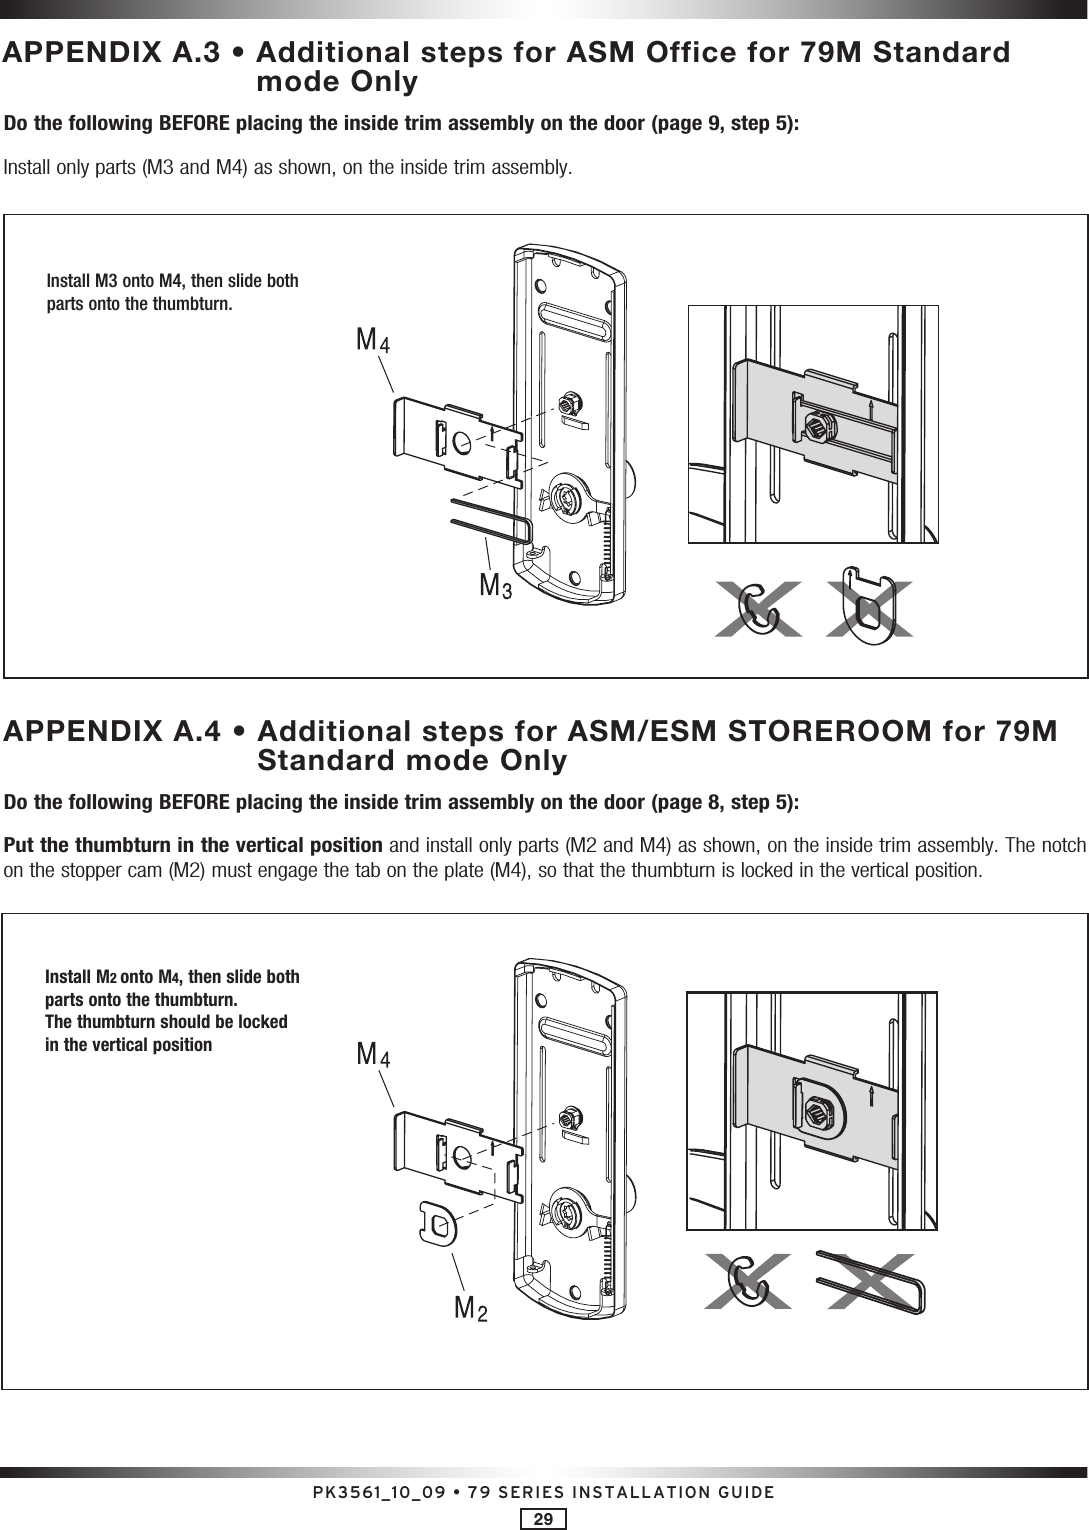 PK3561_10_09 • 79 SERIES INSTALLATION GUIDE29APPENDIX A.3 •  Additional steps for ASM Office for 79M Standard mode OnlyDo the following BEFORE placing the inside trim assembly on the door (page 9, step 5):Install only parts (M3 and M4) as shown, on the inside trim assembly.APPENDIX A.4 •  Additional steps for ASM/ESM STOREROOM for 79M Standard mode OnlyDo the following BEFORE placing the inside trim assembly on the door (page 8, step 5):Put the thumbturn in the vertical position and install only parts (M2 and M4) as shown, on the inside trim assembly. The notch on the stopper cam (M2) must engage the tab on the plate (M4), so that the thumbturn is locked in the vertical position. Install M3 onto M4, then slide both parts onto the thumbturn.Install M2 onto M4, then slide both parts onto the thumbturn.The thumbturn should be locked in the vertical position